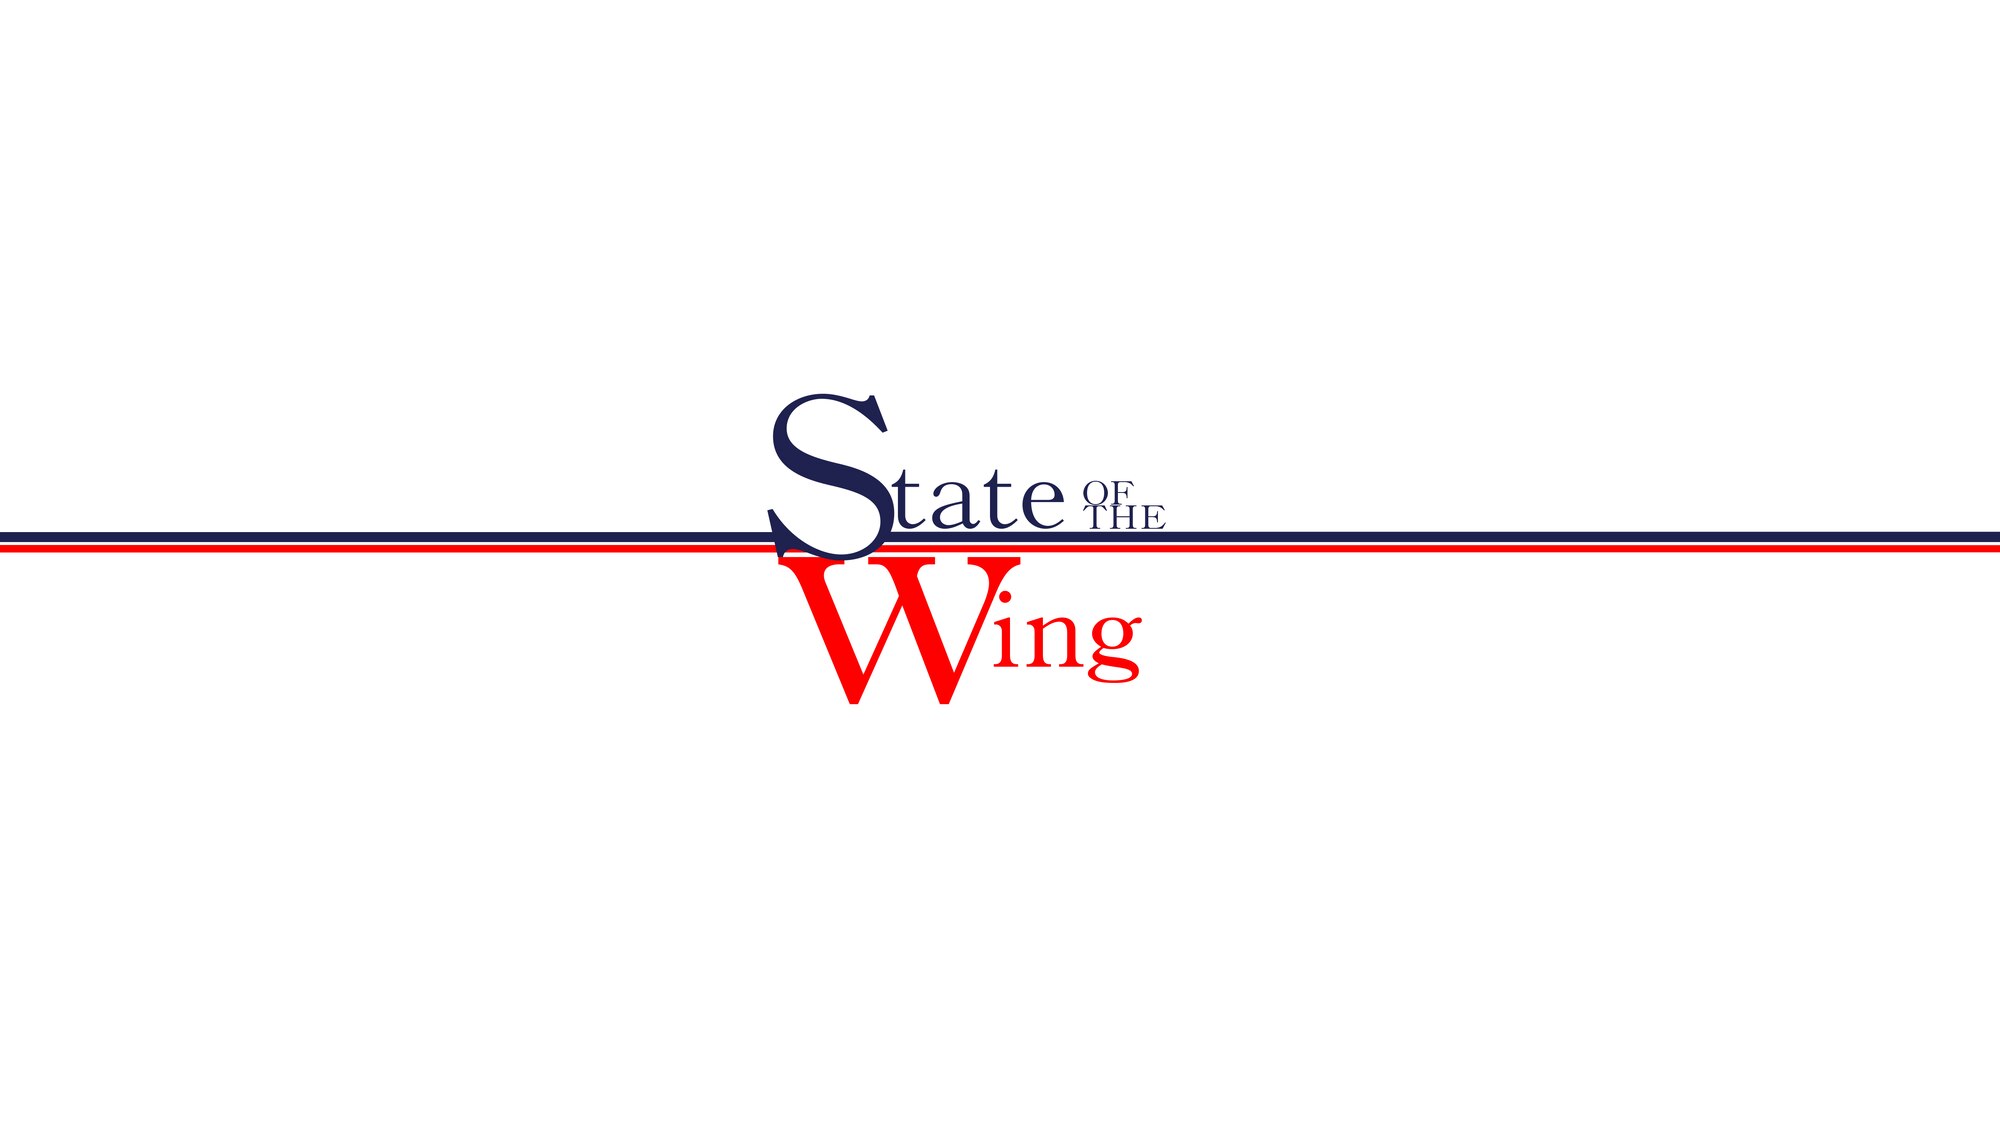 State of the Wing Address